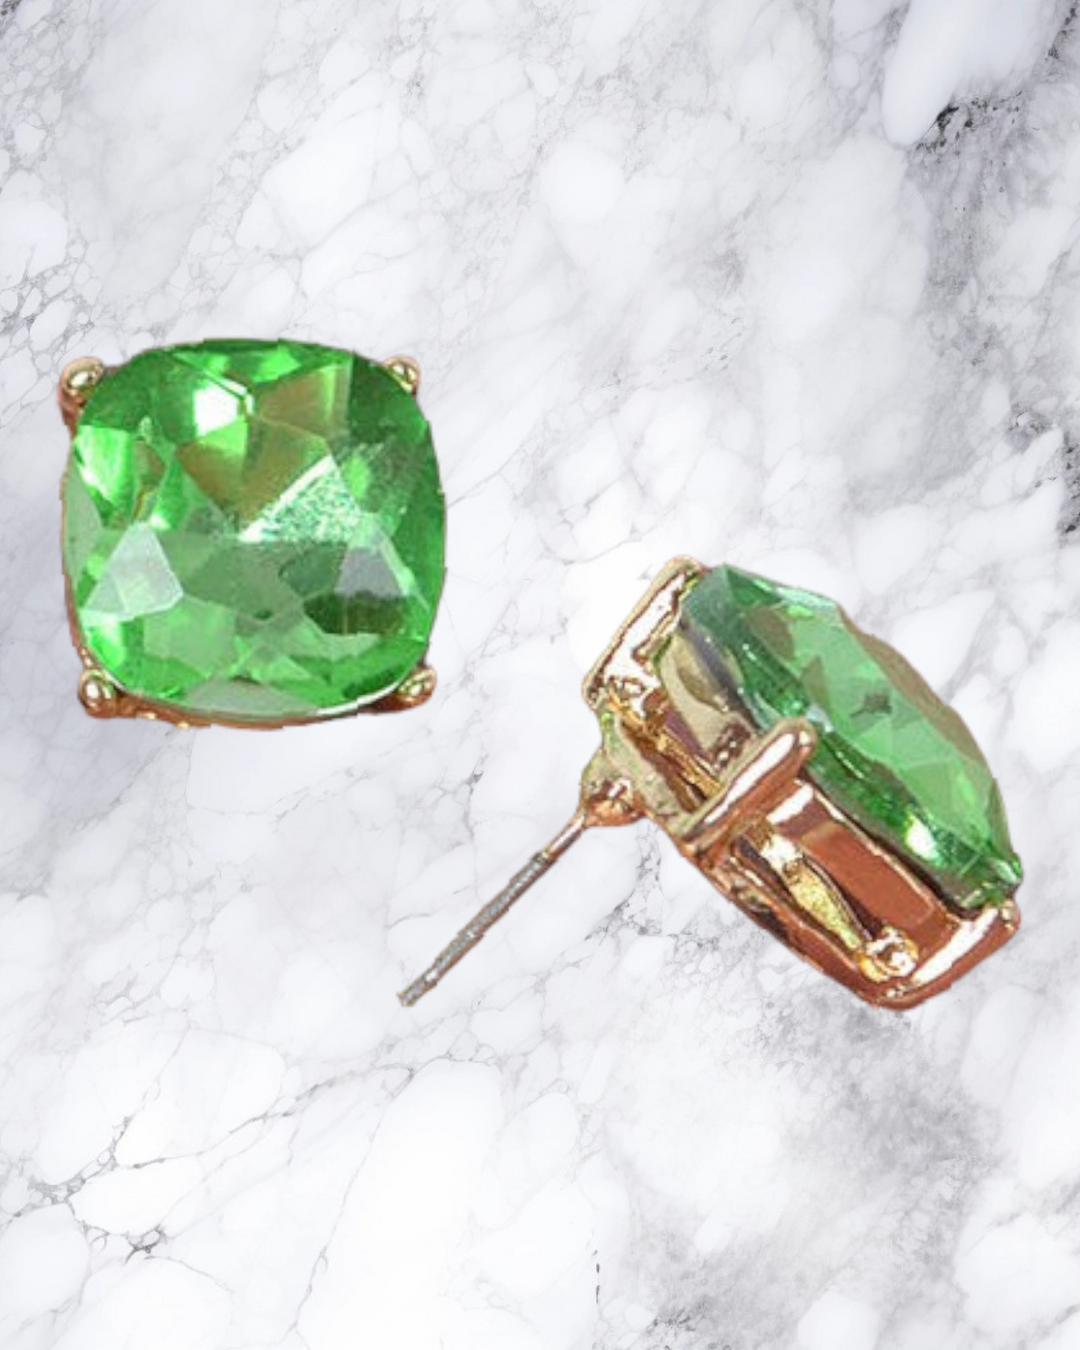 the green square stud earrings lie on a marble surface